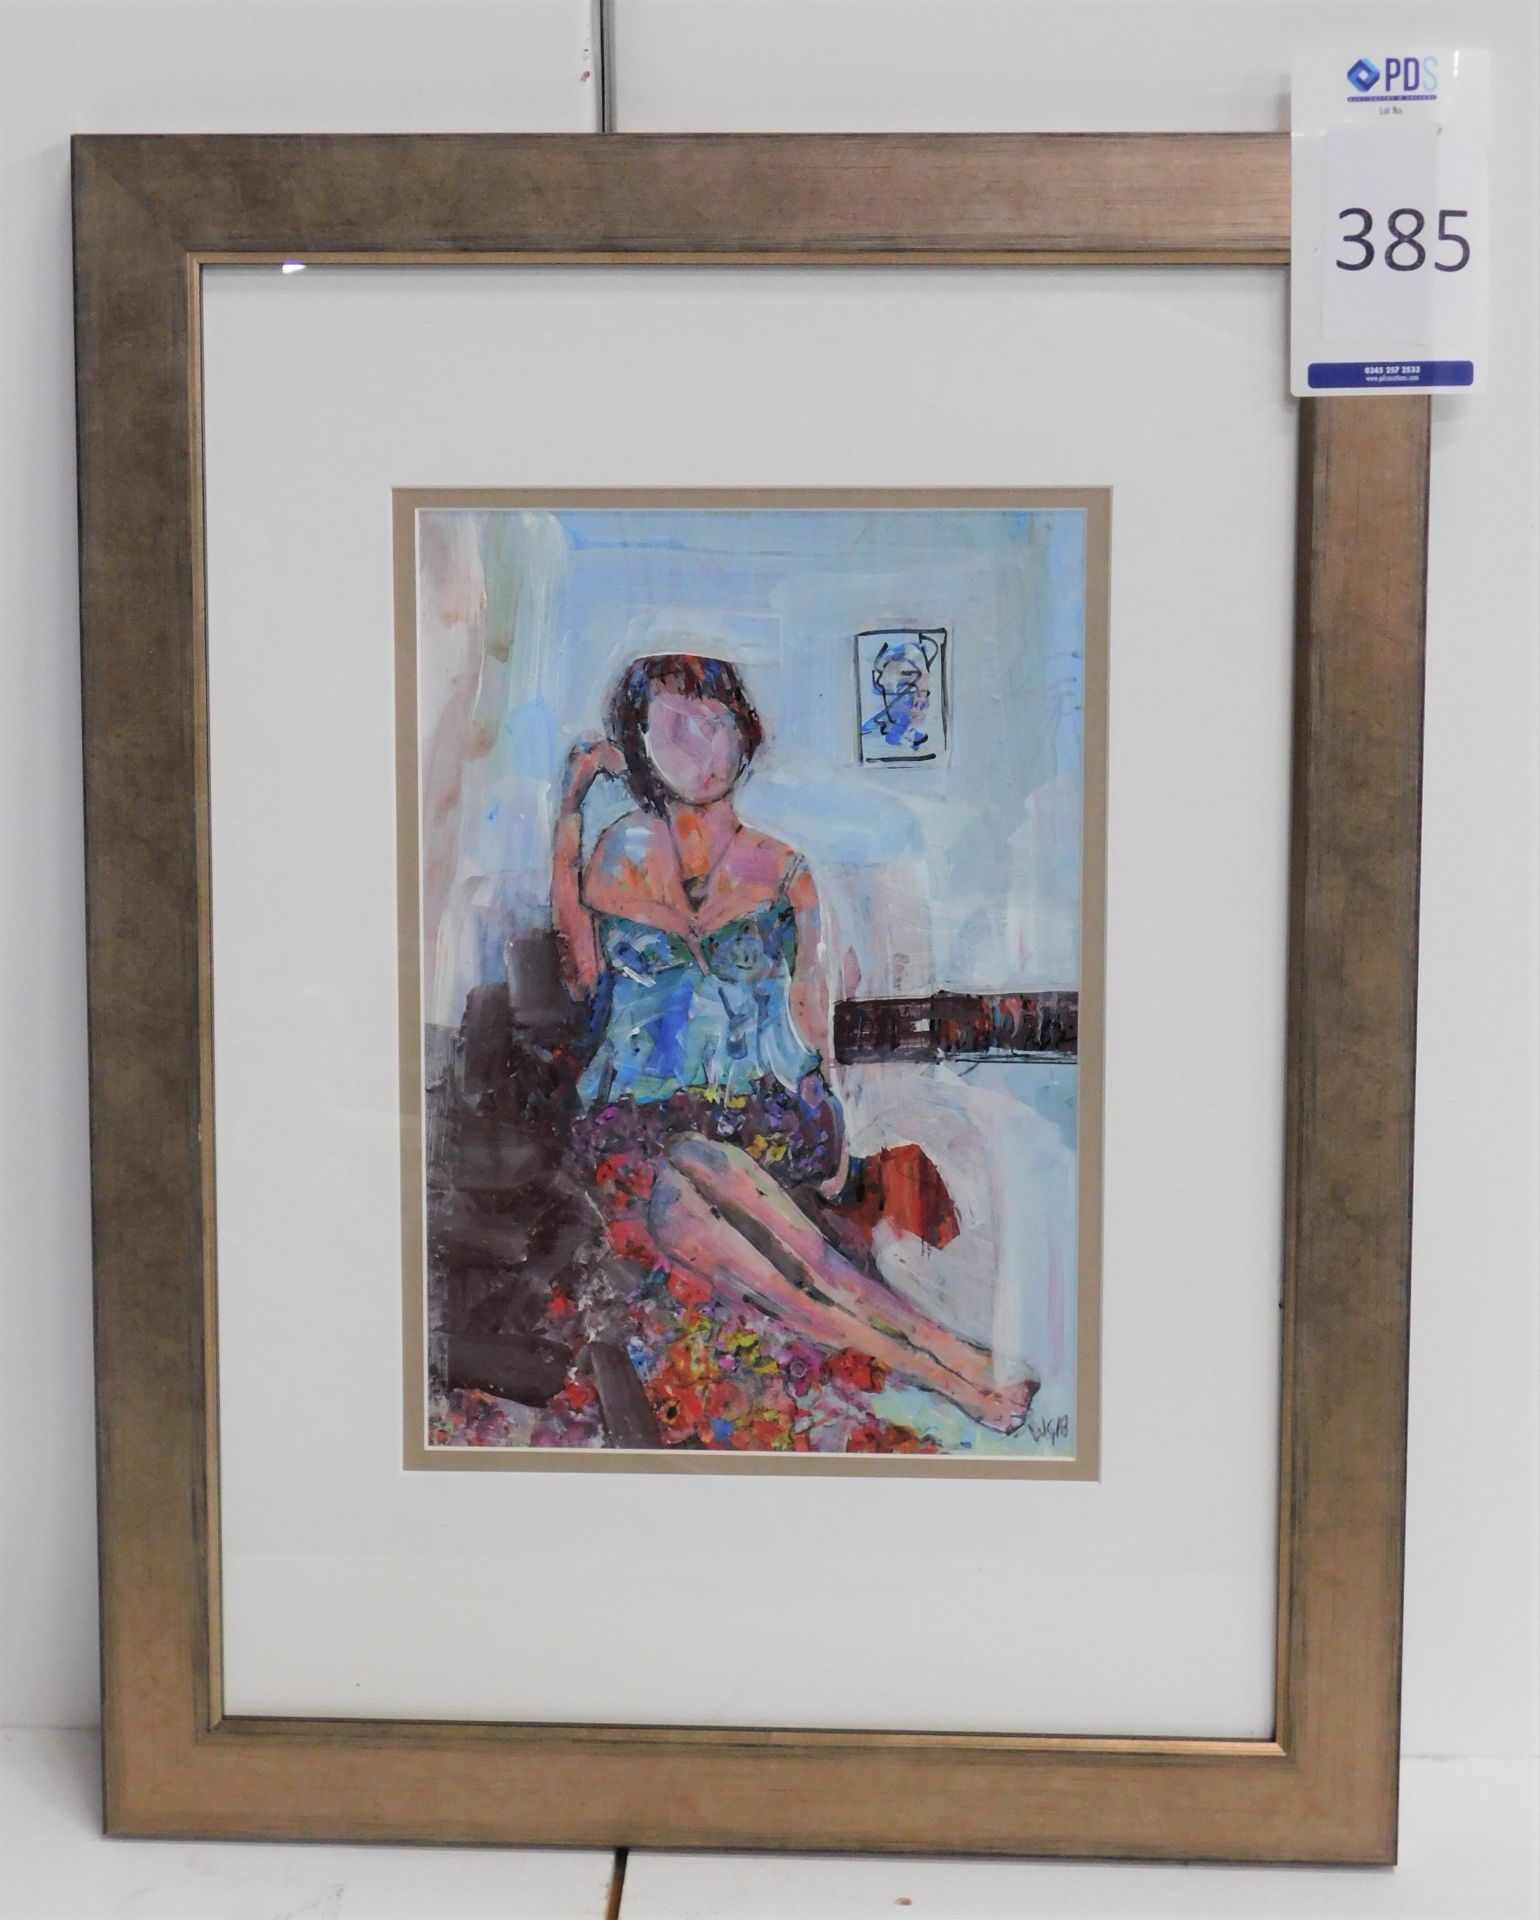 Framed “The Landlady” Acrylic on Card by Robert Hill with Certificate of Authenticity (Overall size: